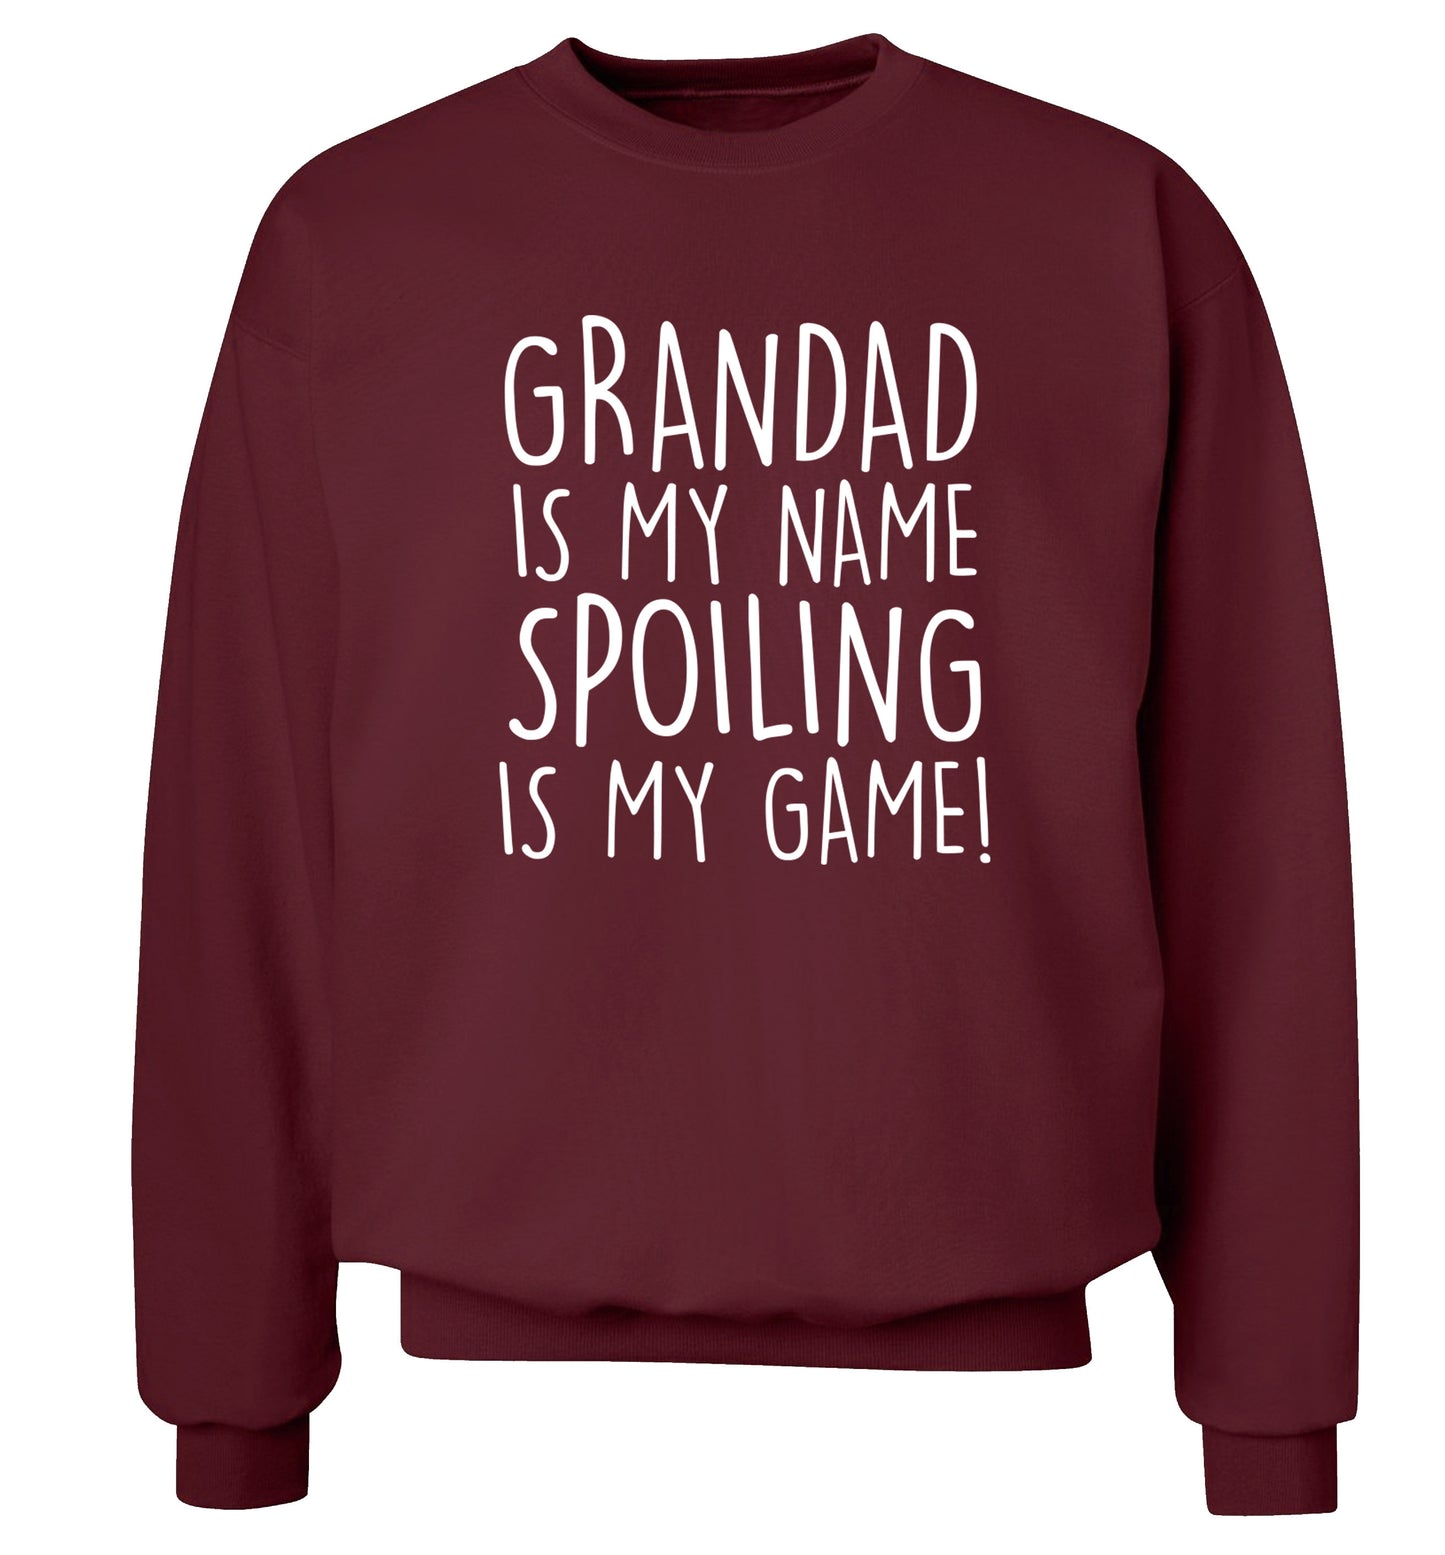 Grandad is my name, spoiling is my game Adult's unisex maroon Sweater 2XL